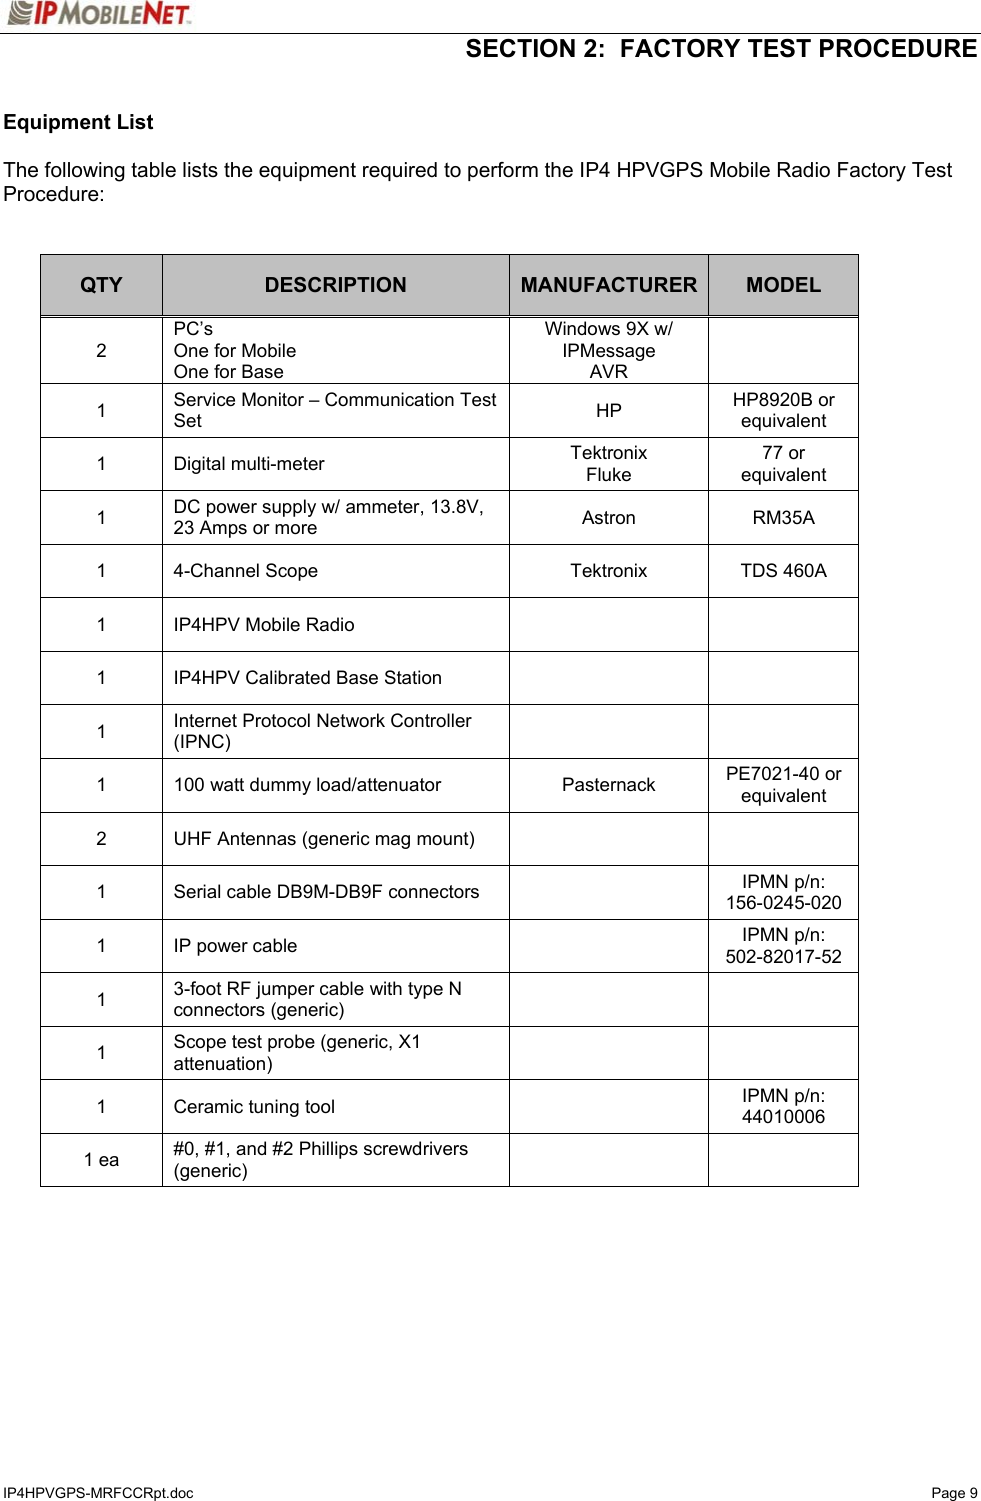   SECTION 2:  FACTORY TEST PROCEDURE  IP4HPVGPS-MRFCCRpt.doc   Page 9  Equipment List   The following table lists the equipment required to perform the IP4 HPVGPS Mobile Radio Factory Test Procedure:   QTY  DESCRIPTION  MANUFACTURER  MODEL 2 PC’s One for Mobile One for Base Windows 9X w/ IPMessage AVR  1  Service Monitor – Communication Test Set  HP  HP8920B or equivalent 1 Digital multi-meter  Tektronix Fluke 77 or equivalent 1  DC power supply w/ ammeter, 13.8V, 23 Amps or more  Astron  RM35A   1  4-Channel Scope  Tektronix  TDS 460A 1  IP4HPV Mobile Radio     1  IP4HPV Calibrated Base Station     1  Internet Protocol Network Controller (IPNC)    1  100 watt dummy load/attenuator  Pasternack  PE7021-40 or equivalent 2  UHF Antennas (generic mag mount)     1  Serial cable DB9M-DB9F connectors    IPMN p/n:  156-0245-020 1  IP power cable    IPMN p/n: 502-82017-52 1  3-foot RF jumper cable with type N connectors (generic)    1  Scope test probe (generic, X1 attenuation)    1  Ceramic tuning tool    IPMN p/n: 44010006 1 ea  #0, #1, and #2 Phillips screwdrivers (generic)       